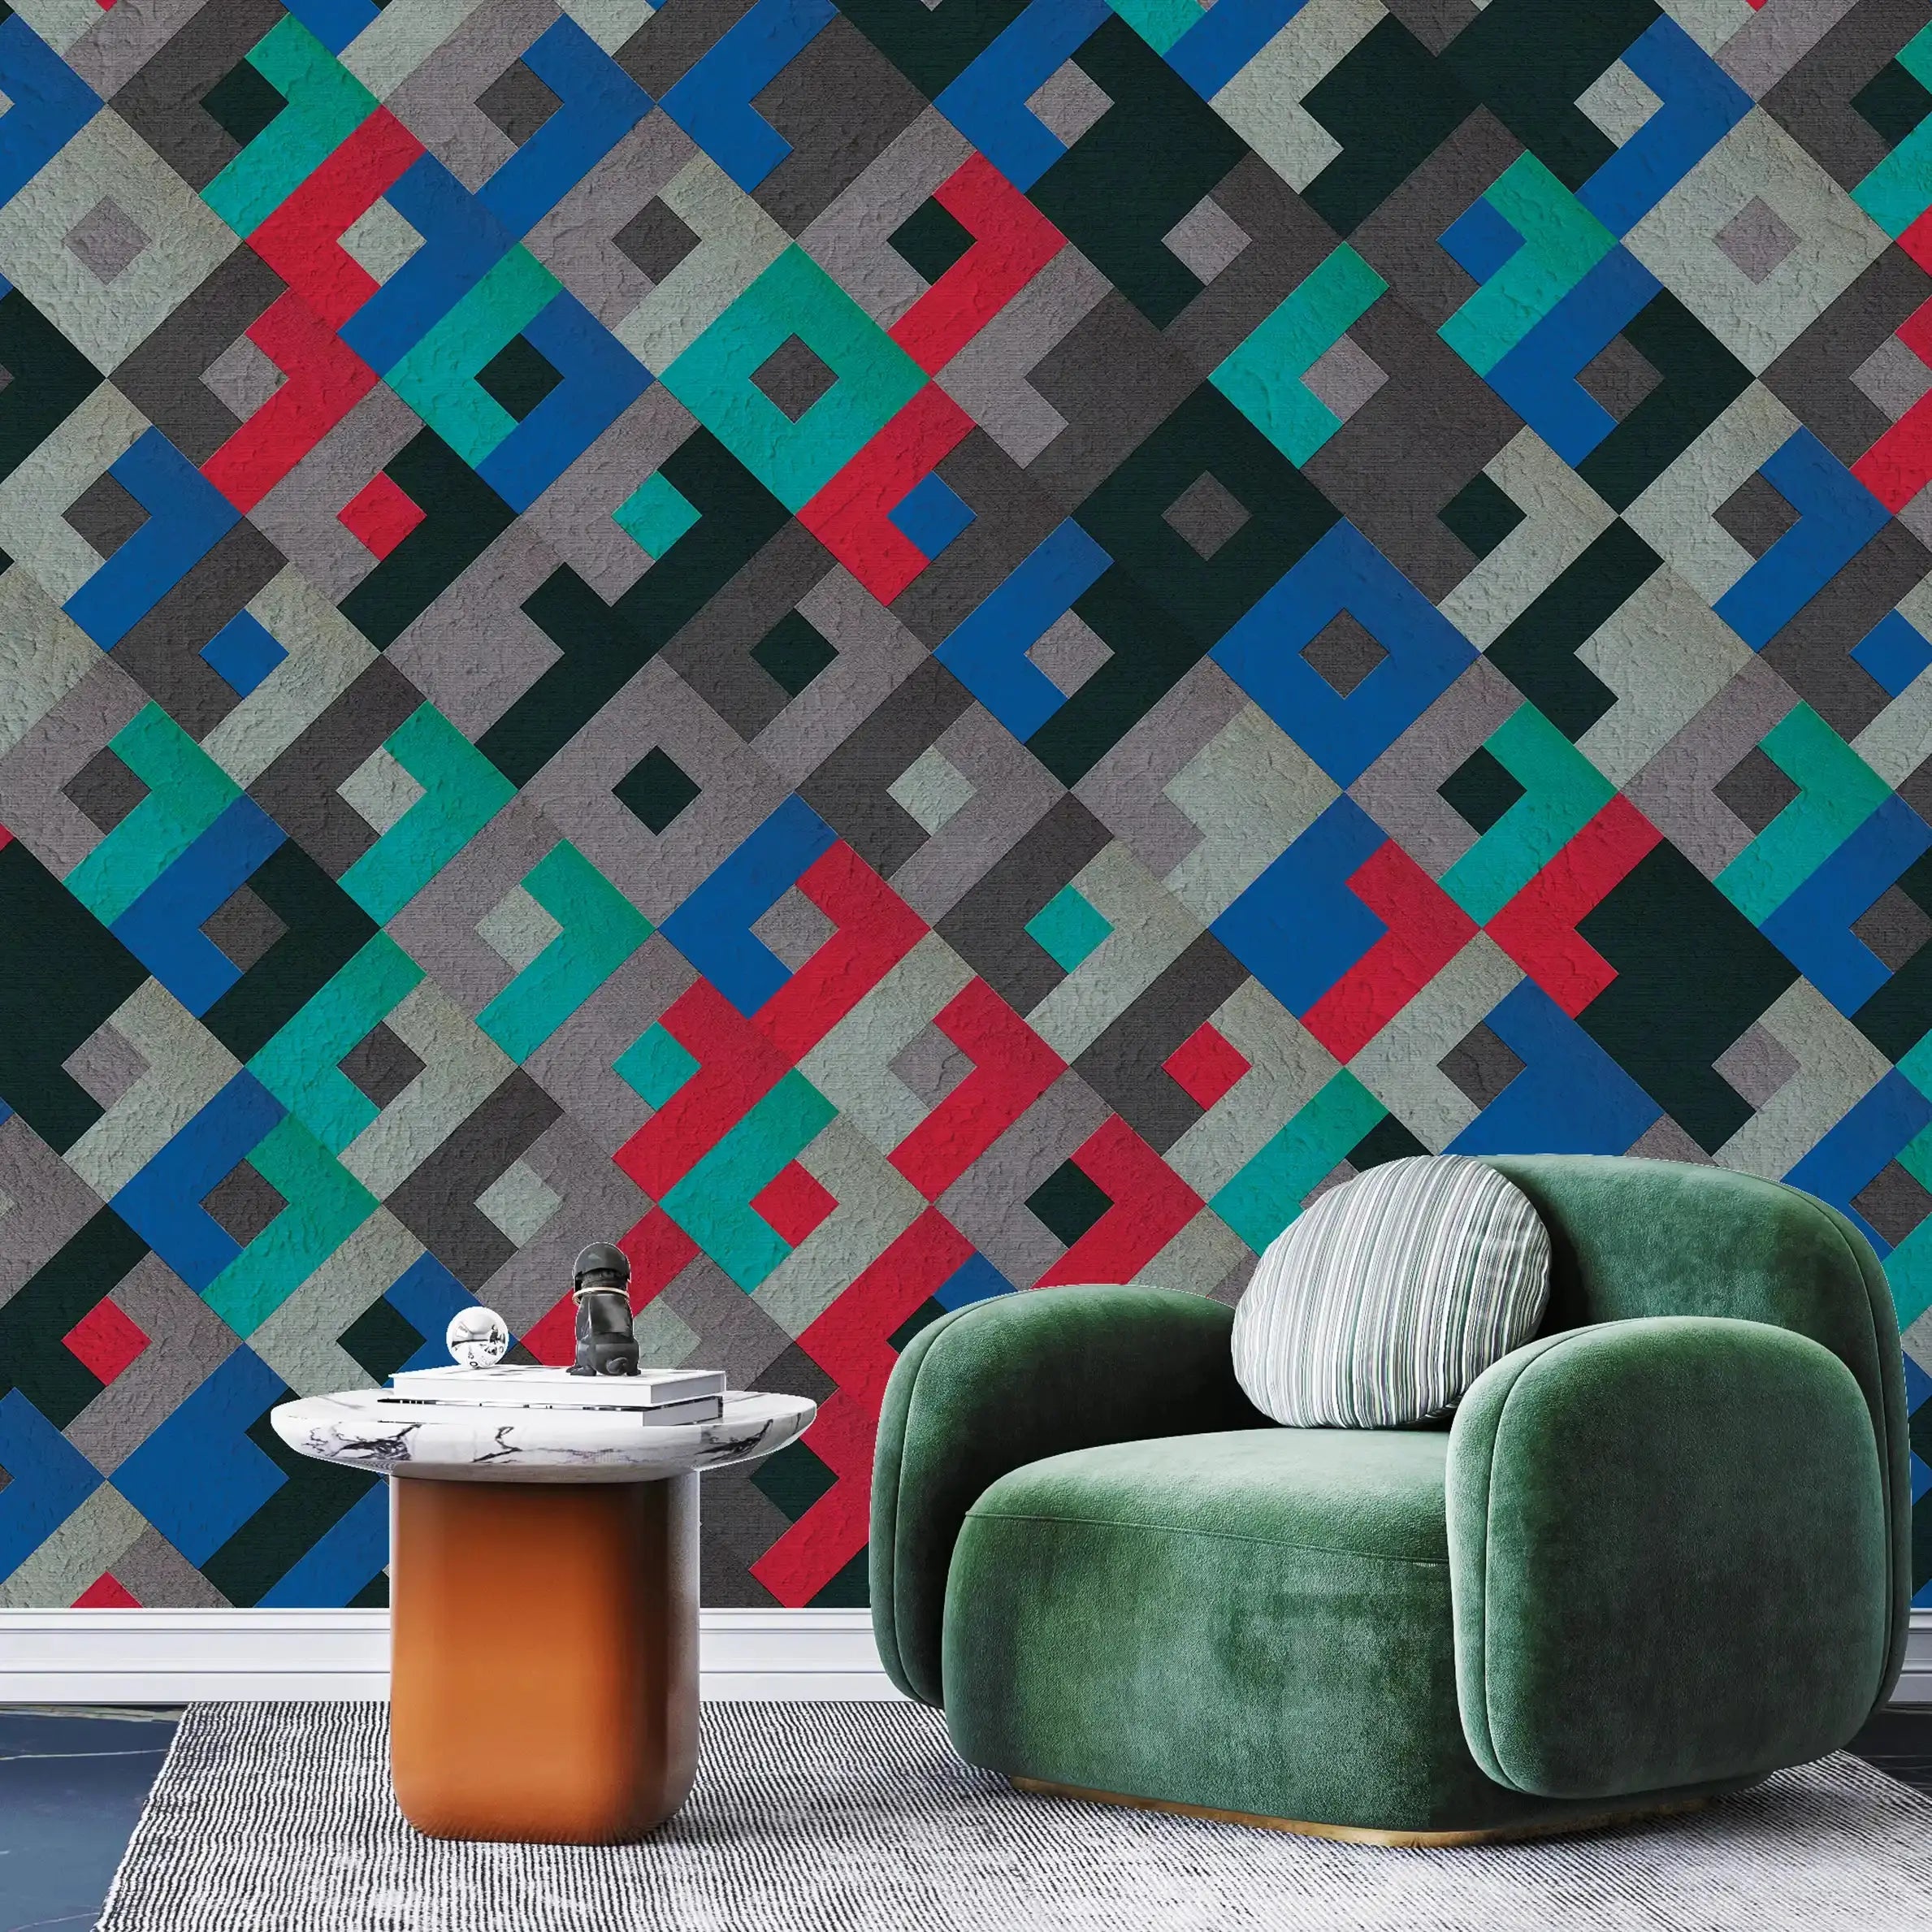 3064-C / Colorful Geometric Pattern Wallpaper - Peelable, Stickable, Ideal for Modern Wall Decor or Accent Wall - Artevella